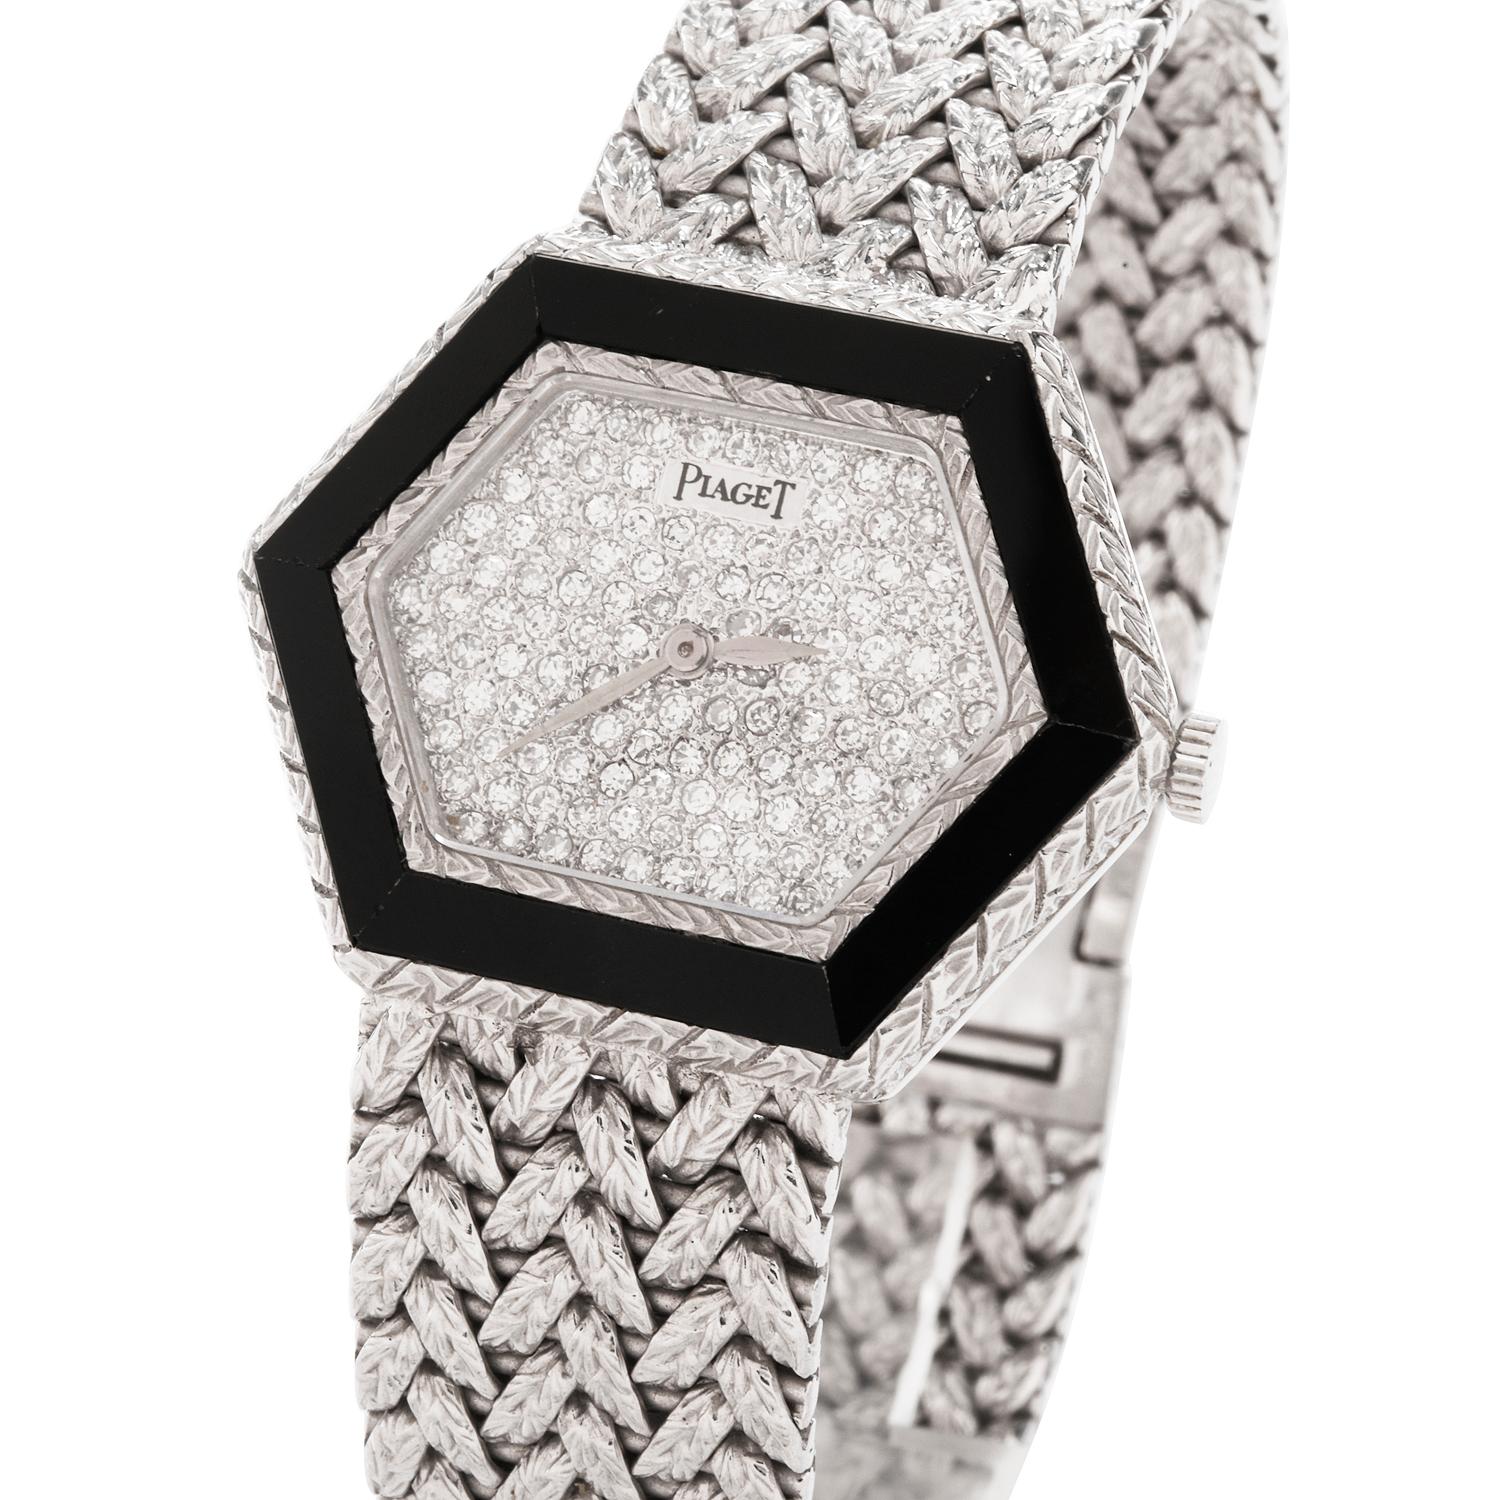 Fitted with an Onyx Bezel and Pave Diamond Dial, this Ladies Circa  early 1970 Piaget watch

is a rare find.  The watch case is particularly unique, rendered in a Hexagonal shape.

The bracelet too, is fashioned in a braided ropelike texture,